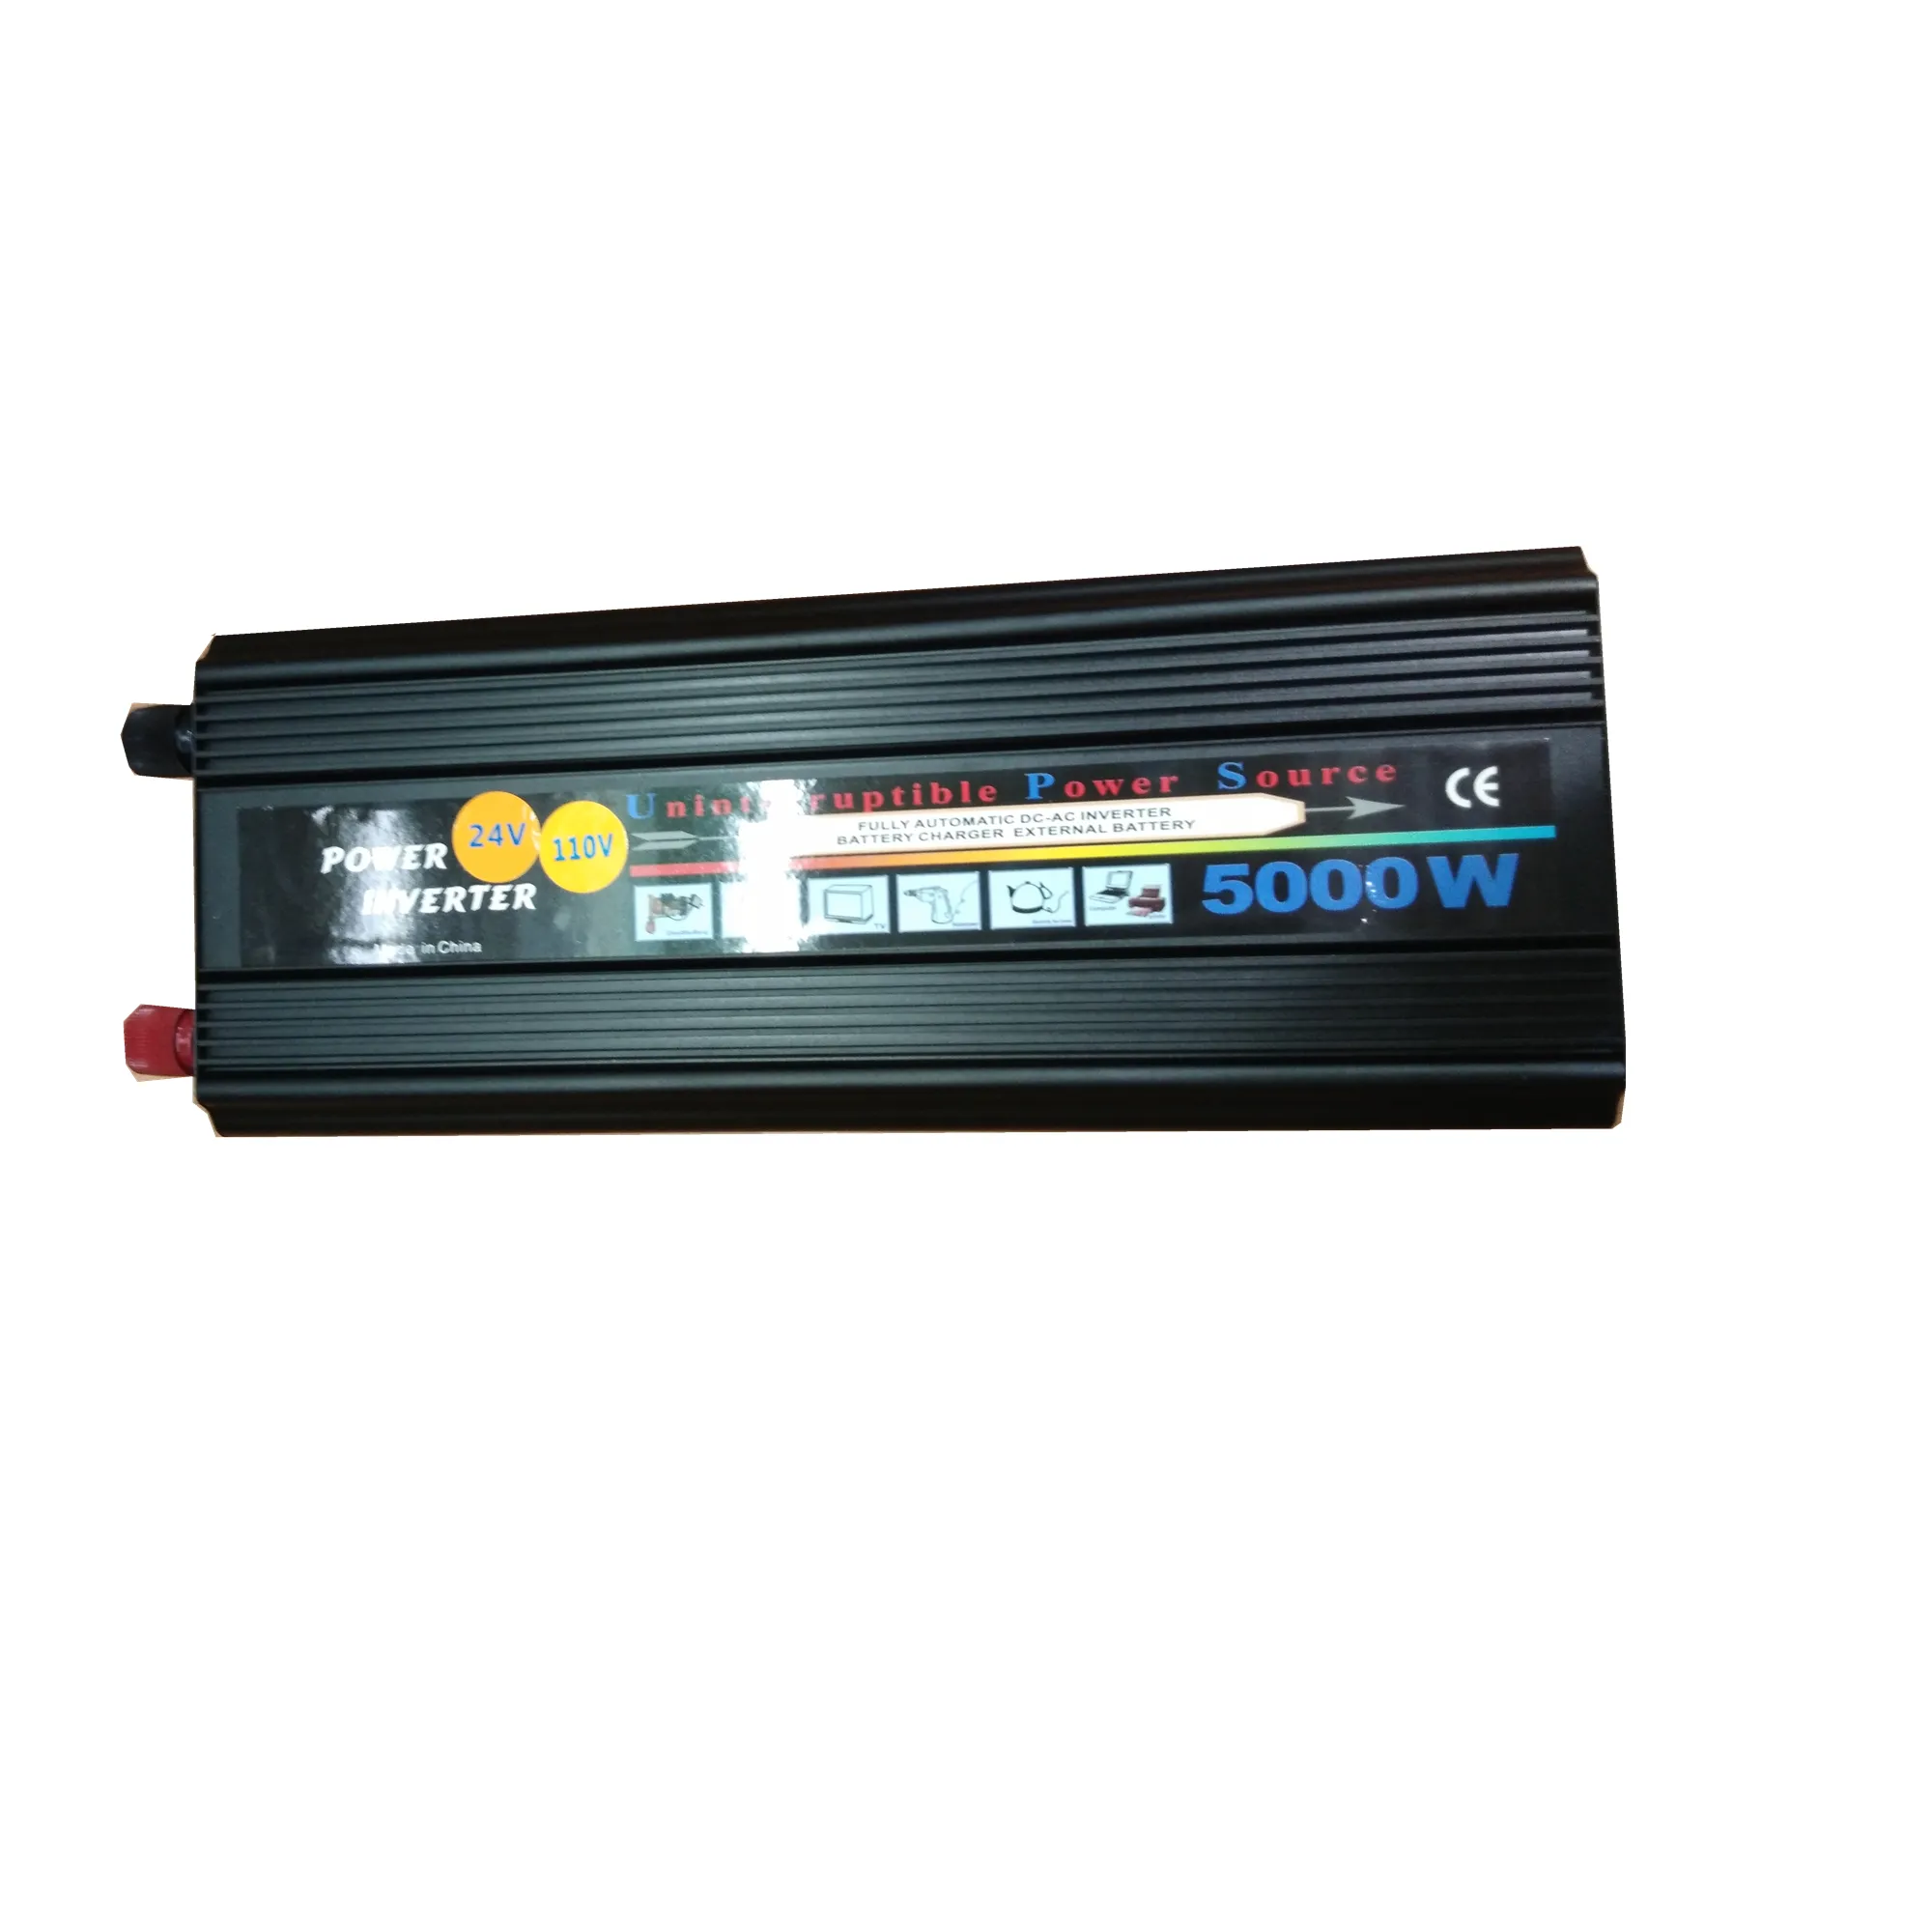 5000W Power Inverter with Battery Charger DC To AC Converter for Home System